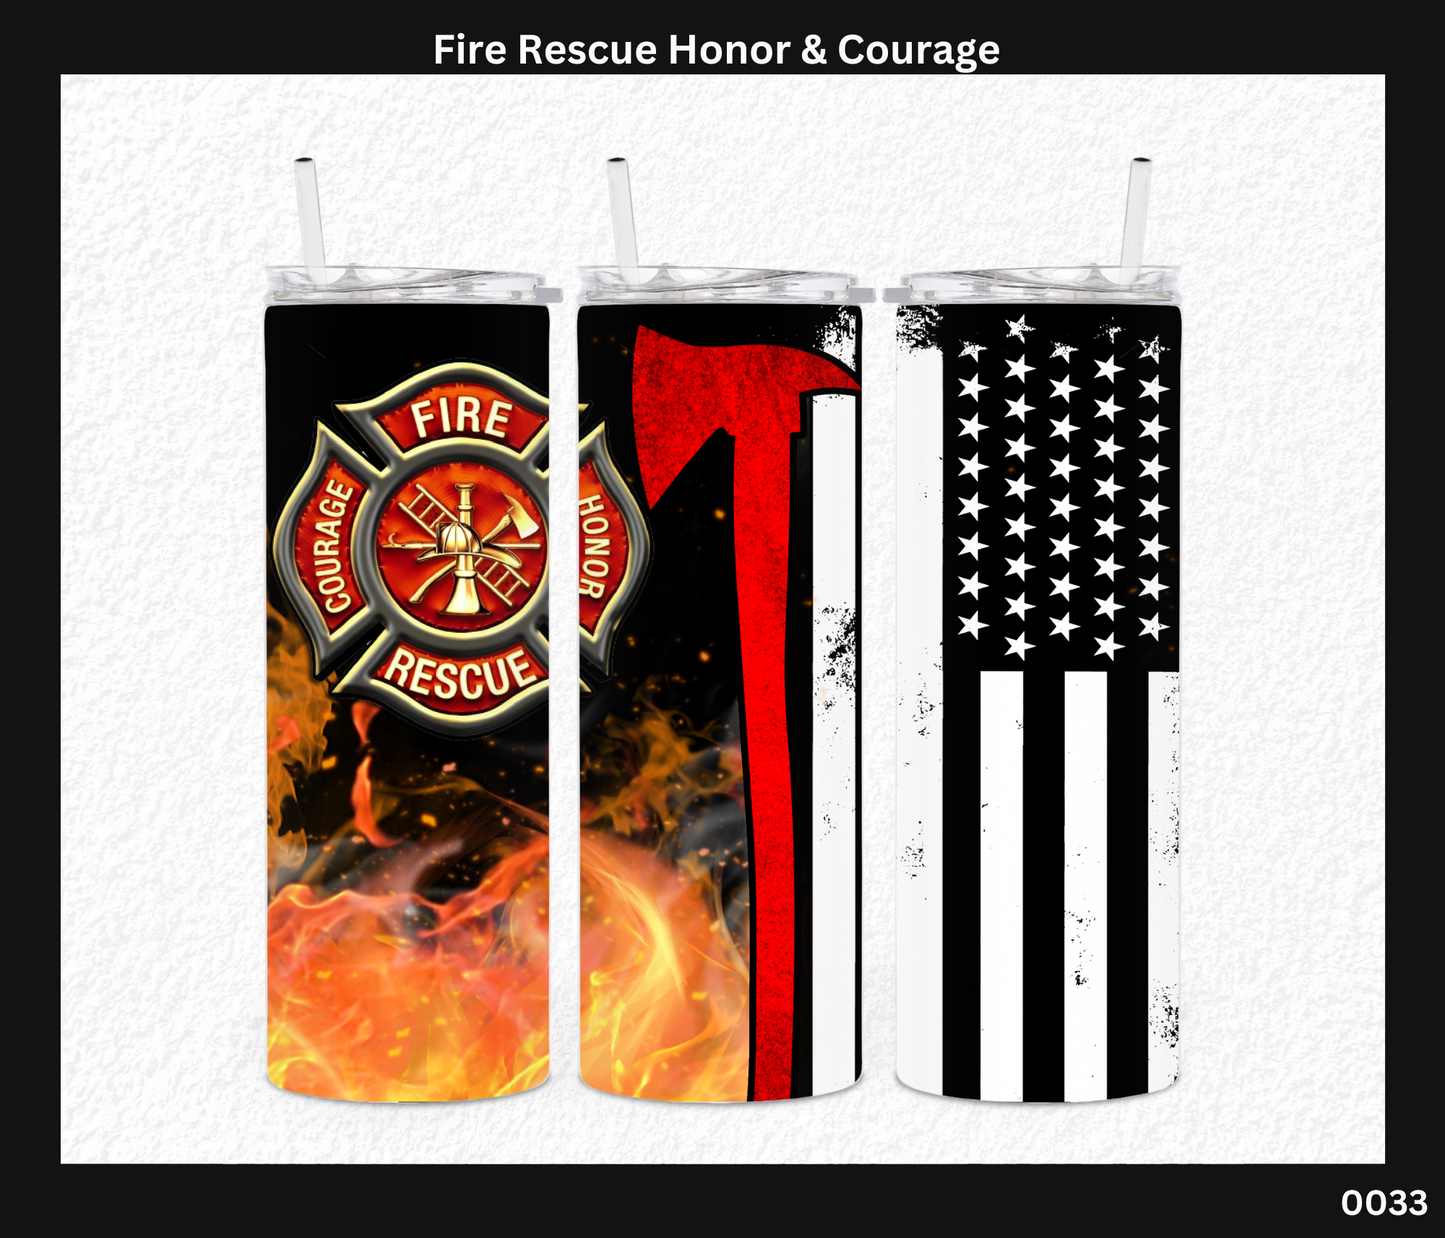 Fire Rescue Honor & Courage